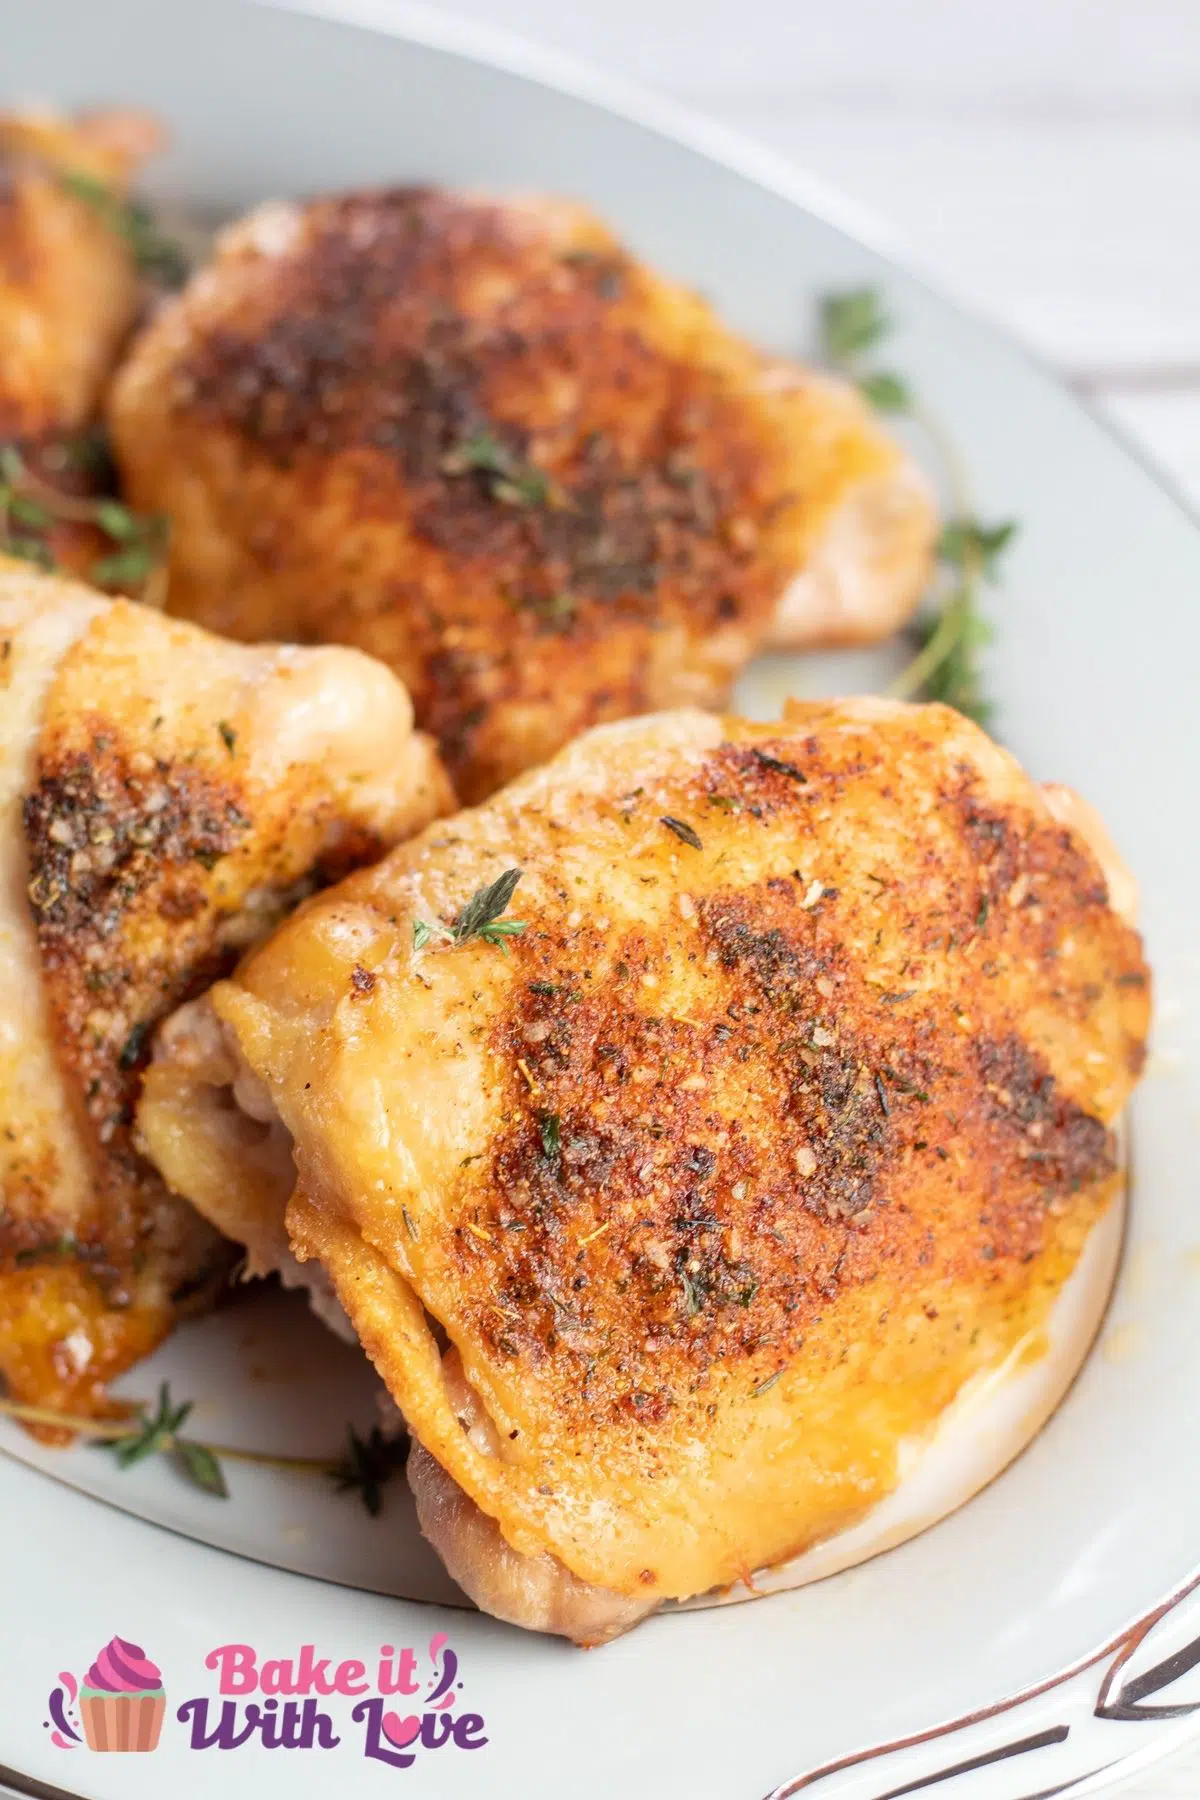 Tall image of oven baked chicken thighs on a white serving plate.